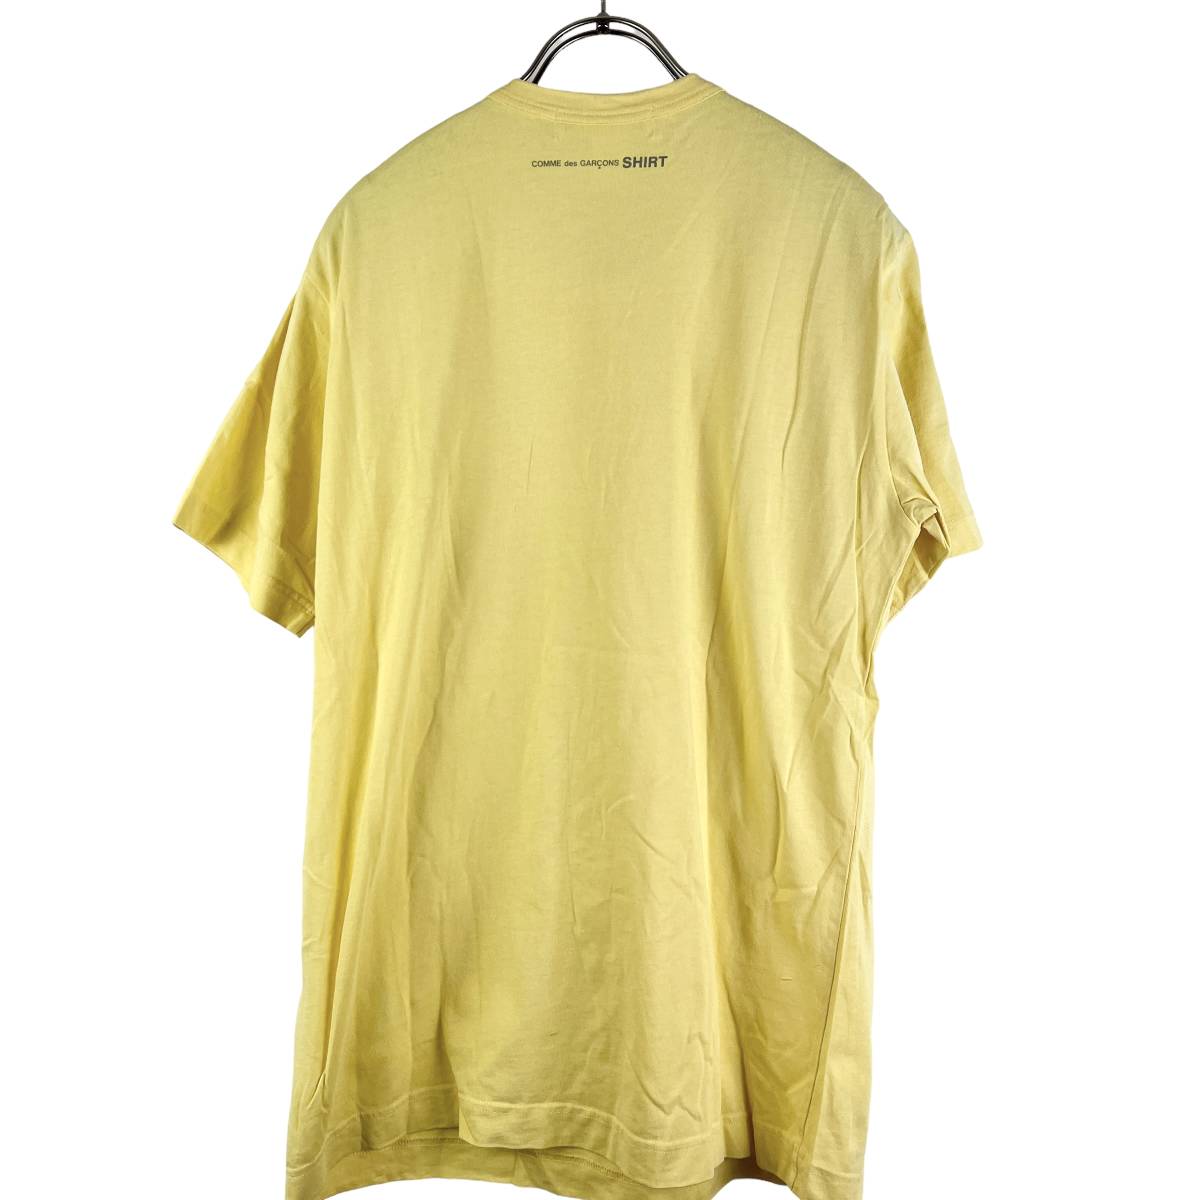 COMME des GARCONS (コムデギャルソン) Cotton Shortsleeve T Shirt (yellow)